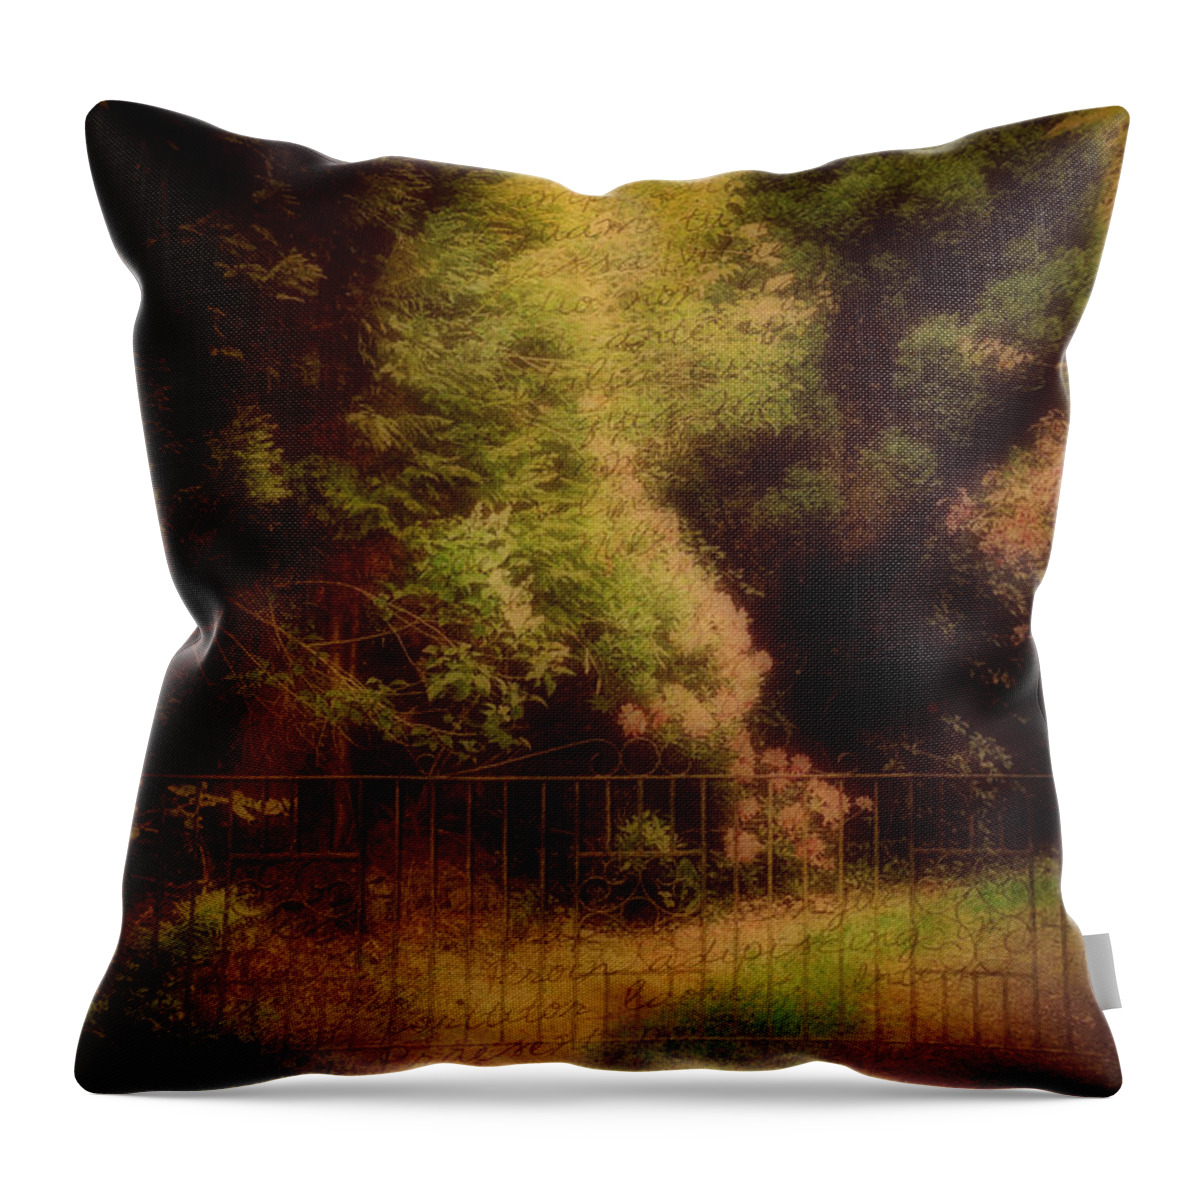 Garden Throw Pillow featuring the photograph Enchanted Path by Marilyn Wilson